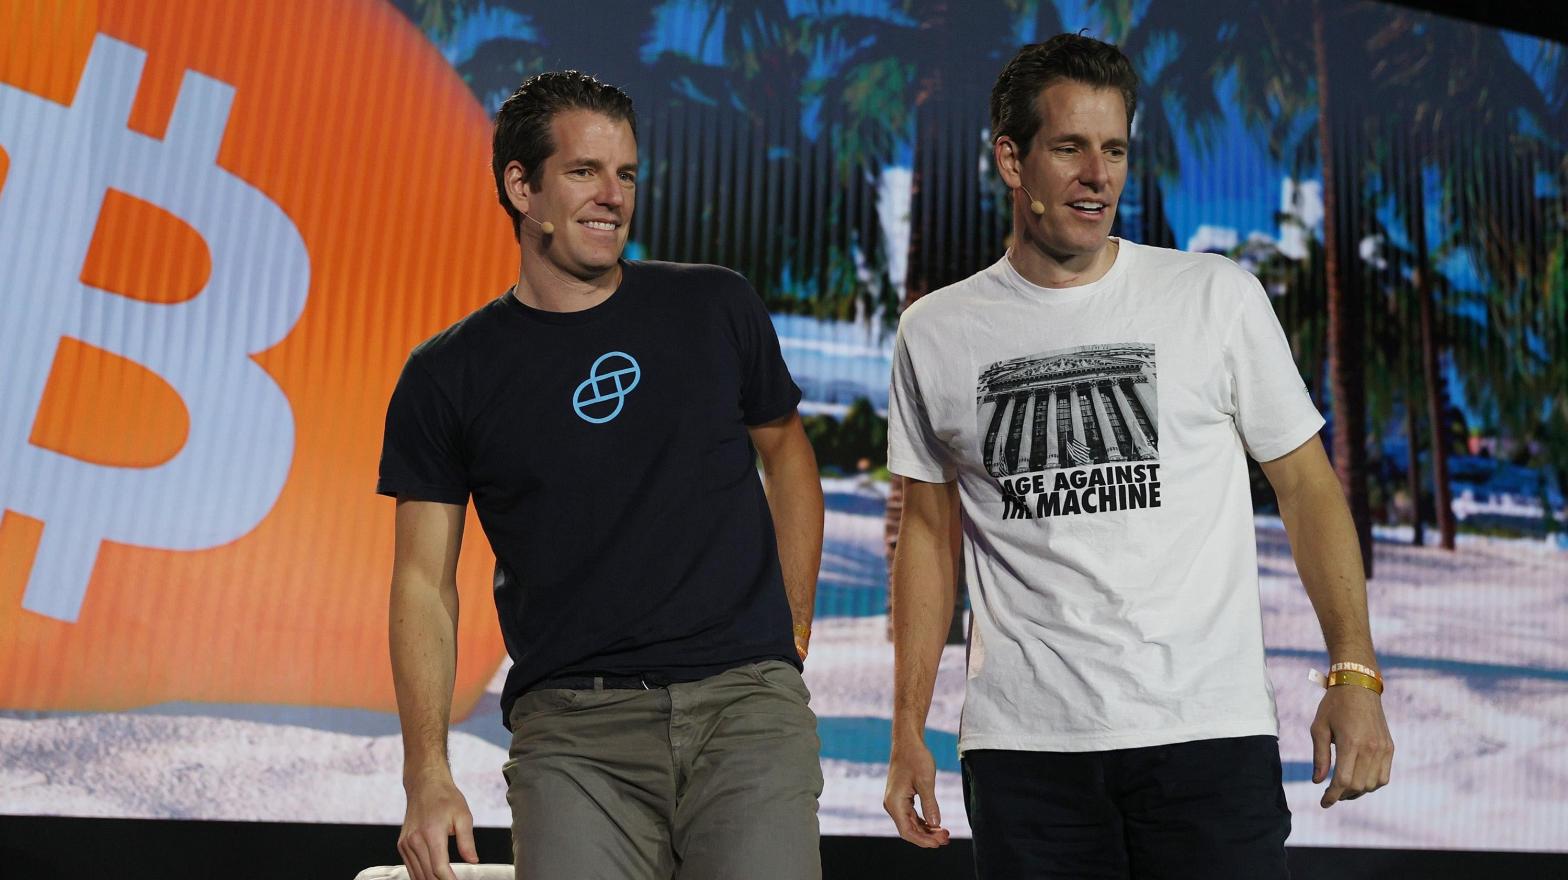 Tyler (L) and Cameron (R) Winklevoss are the founders of cryptocurrency exchange Gemini. Get it? Because they're twins? (Image: Joe Raedle, Getty Images)